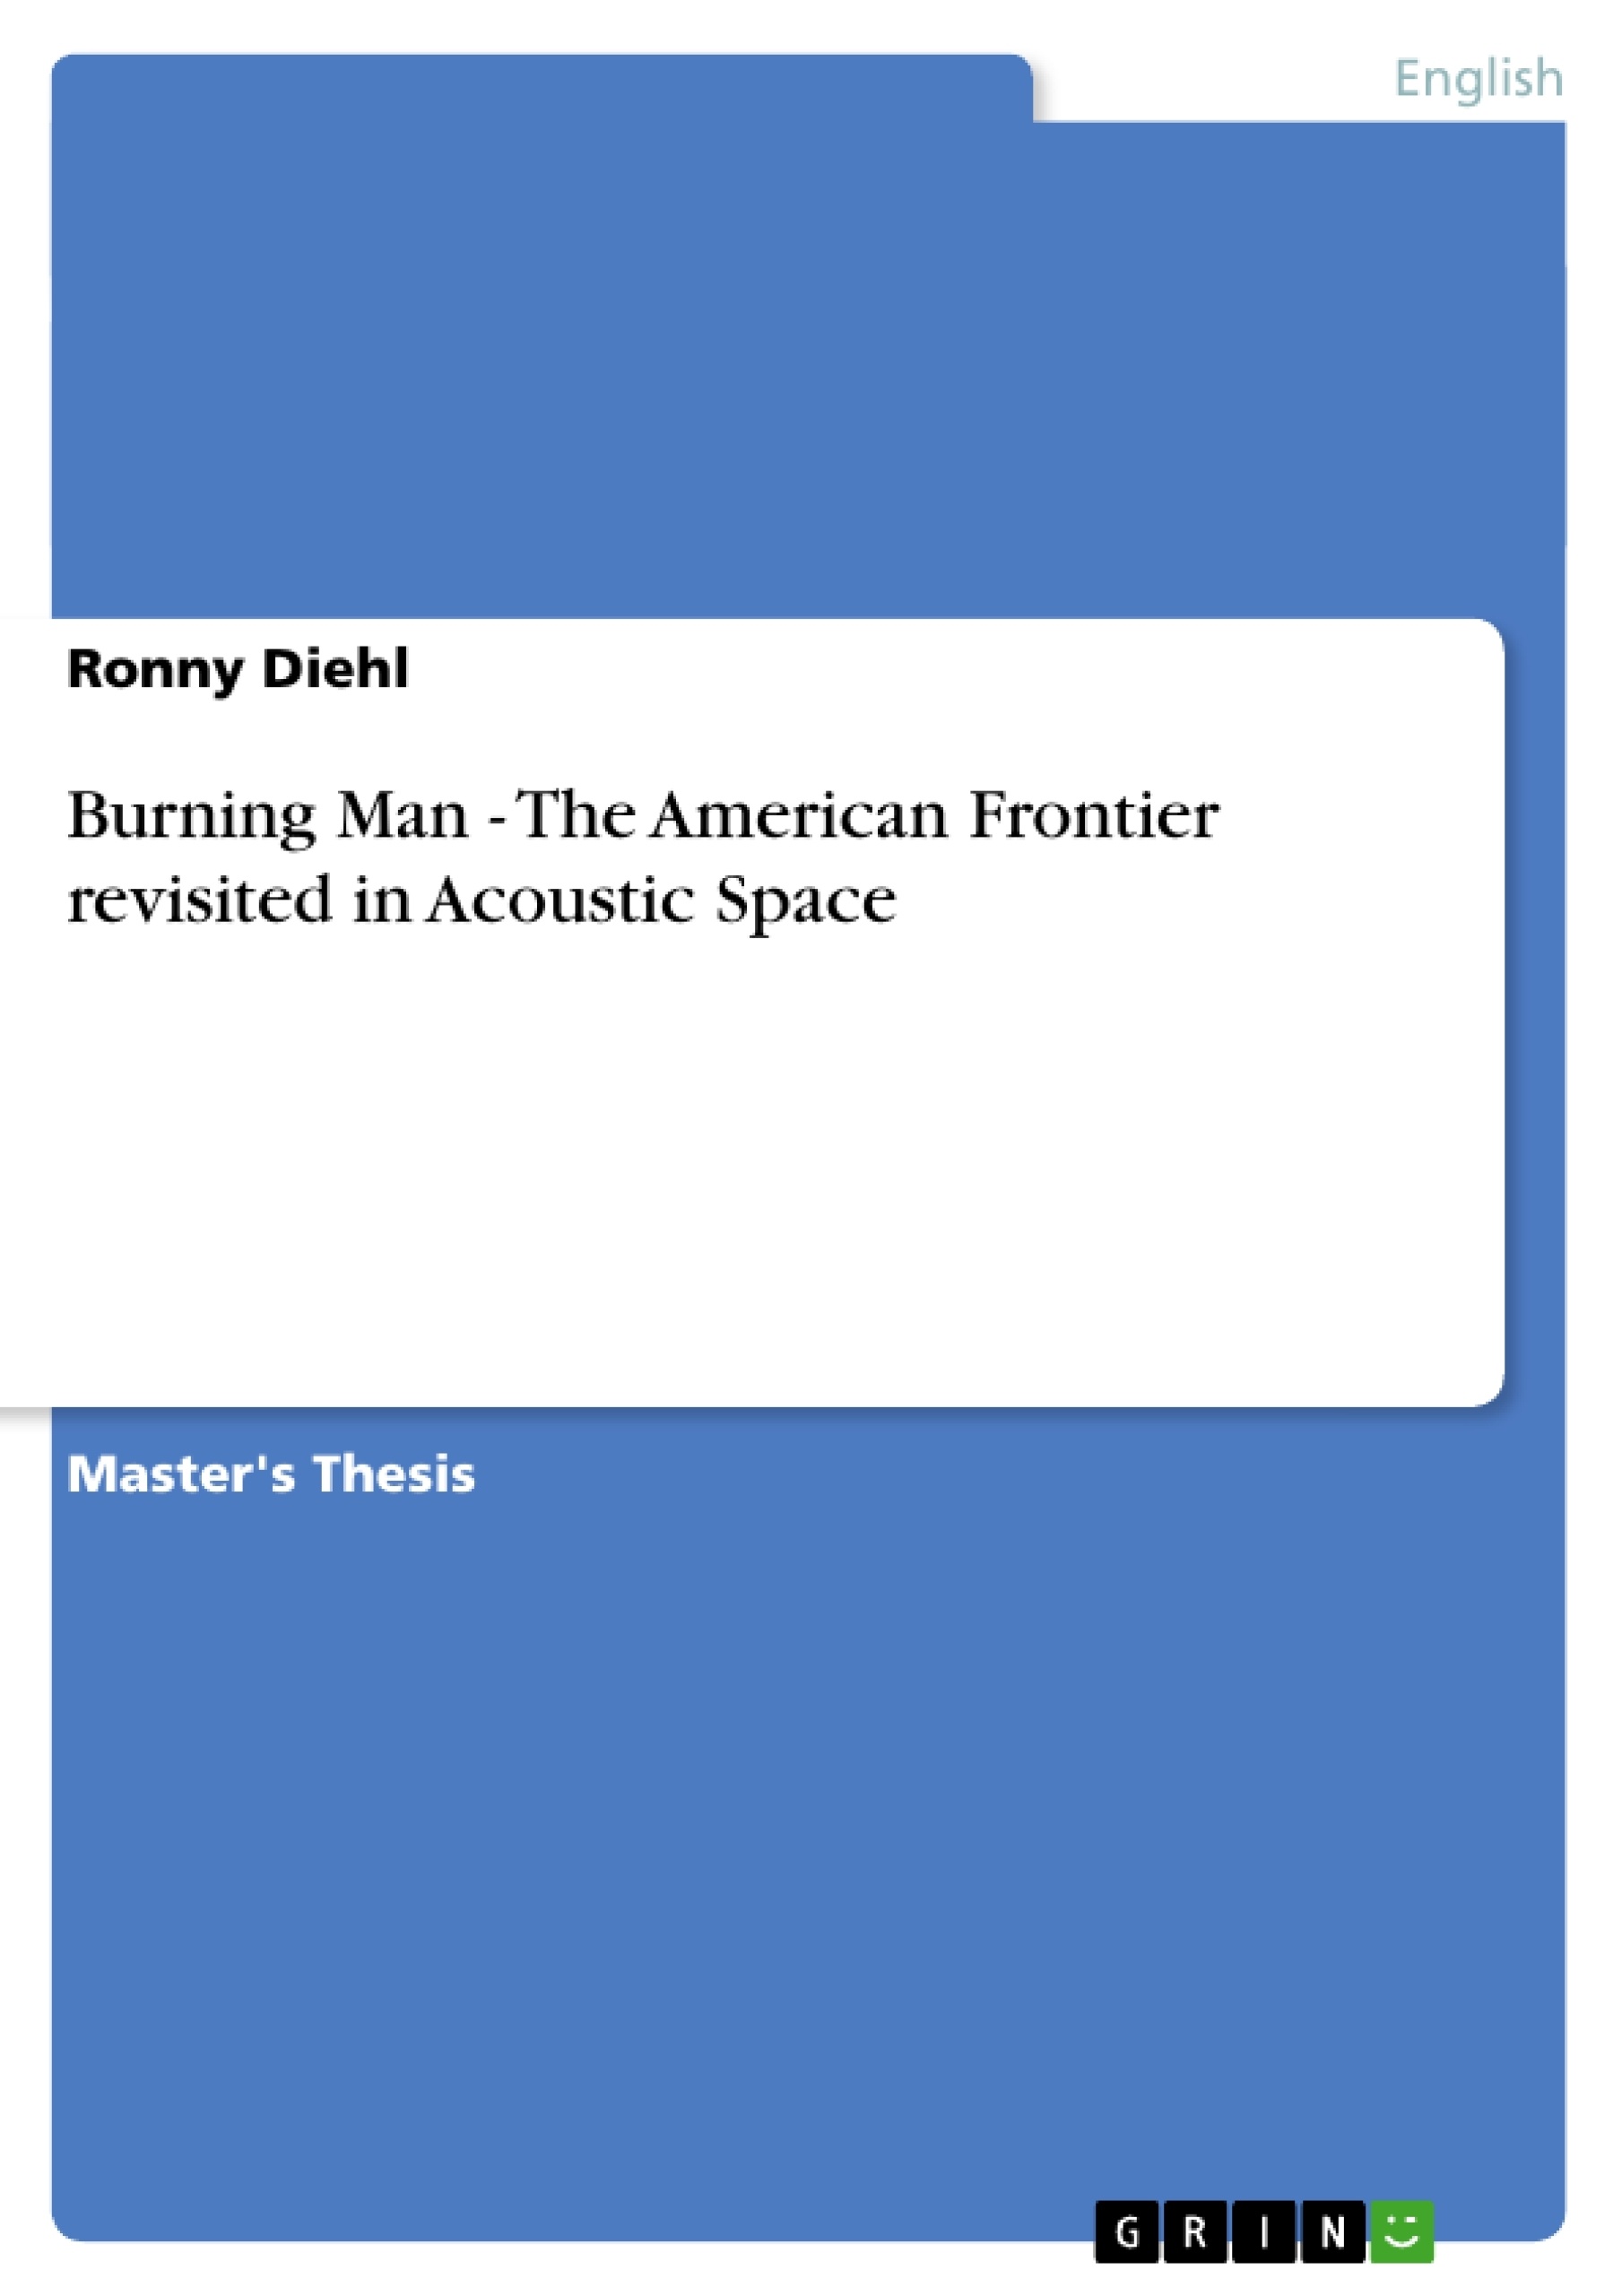 Titre: Burning Man - The American Frontier revisited in Acoustic Space